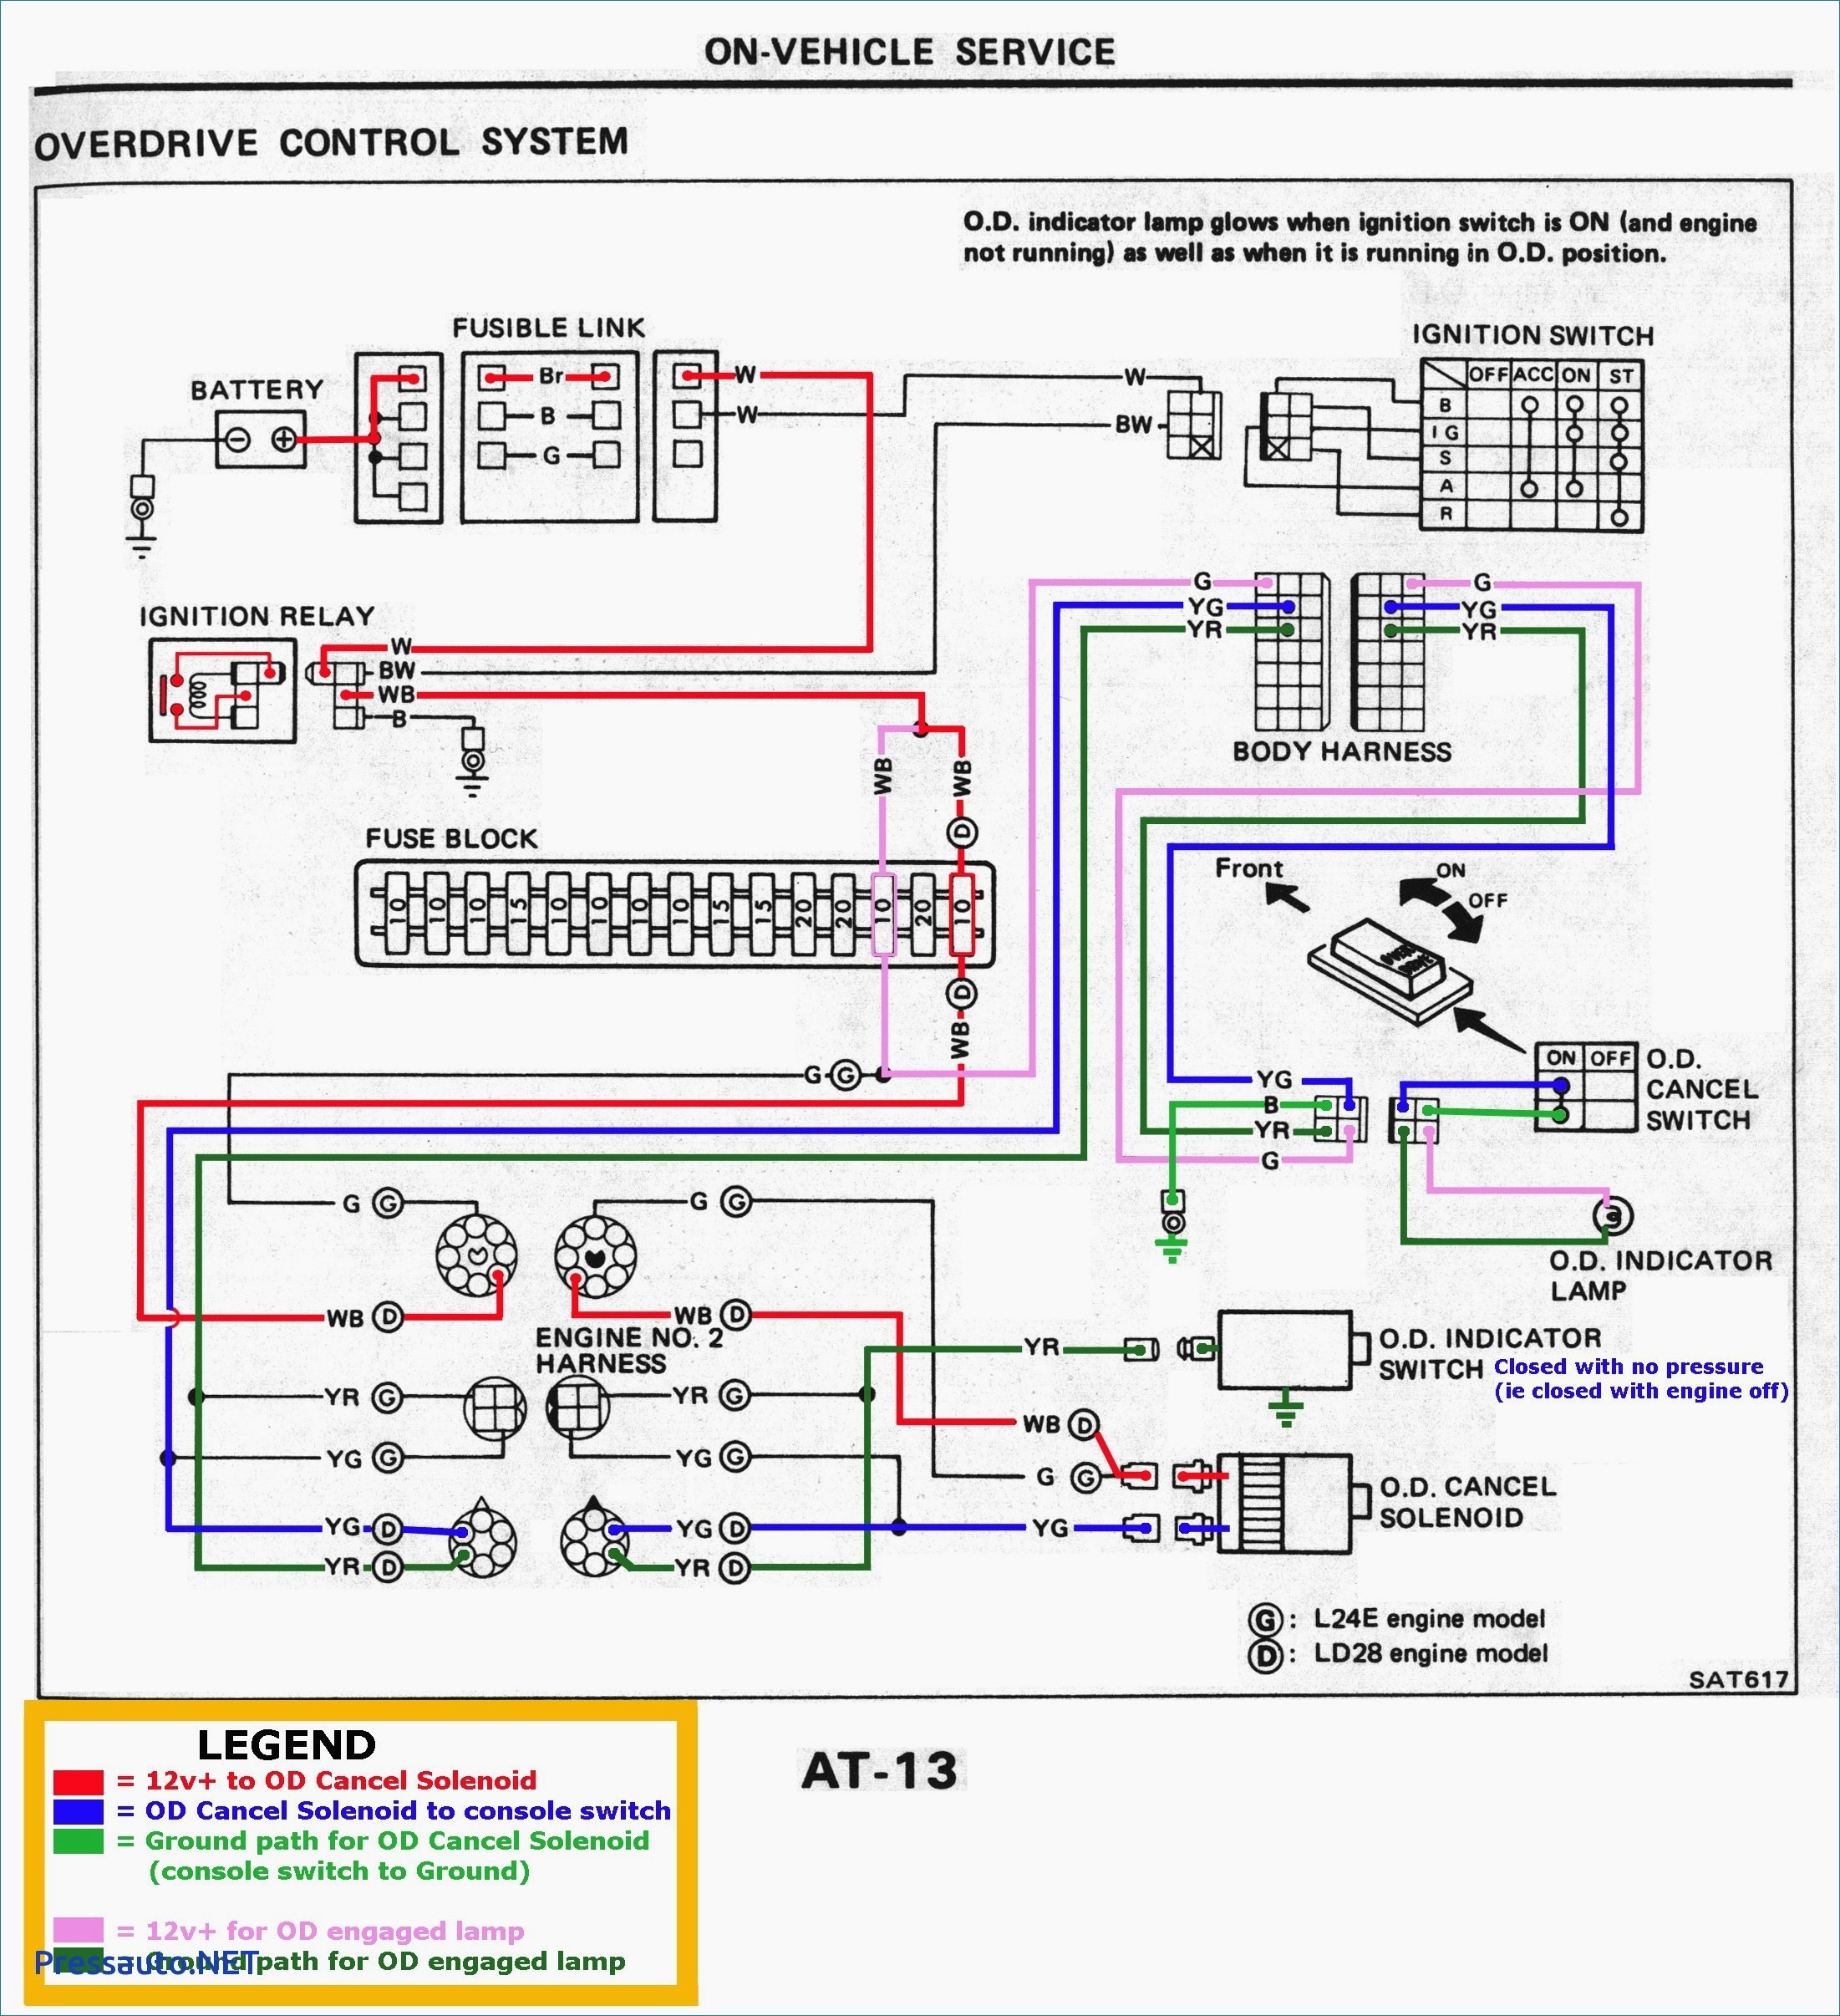 Autozone Wiring Diagram Save Autozone Wiring Diagrams Inspirational Magnificent Wiring Diagrams